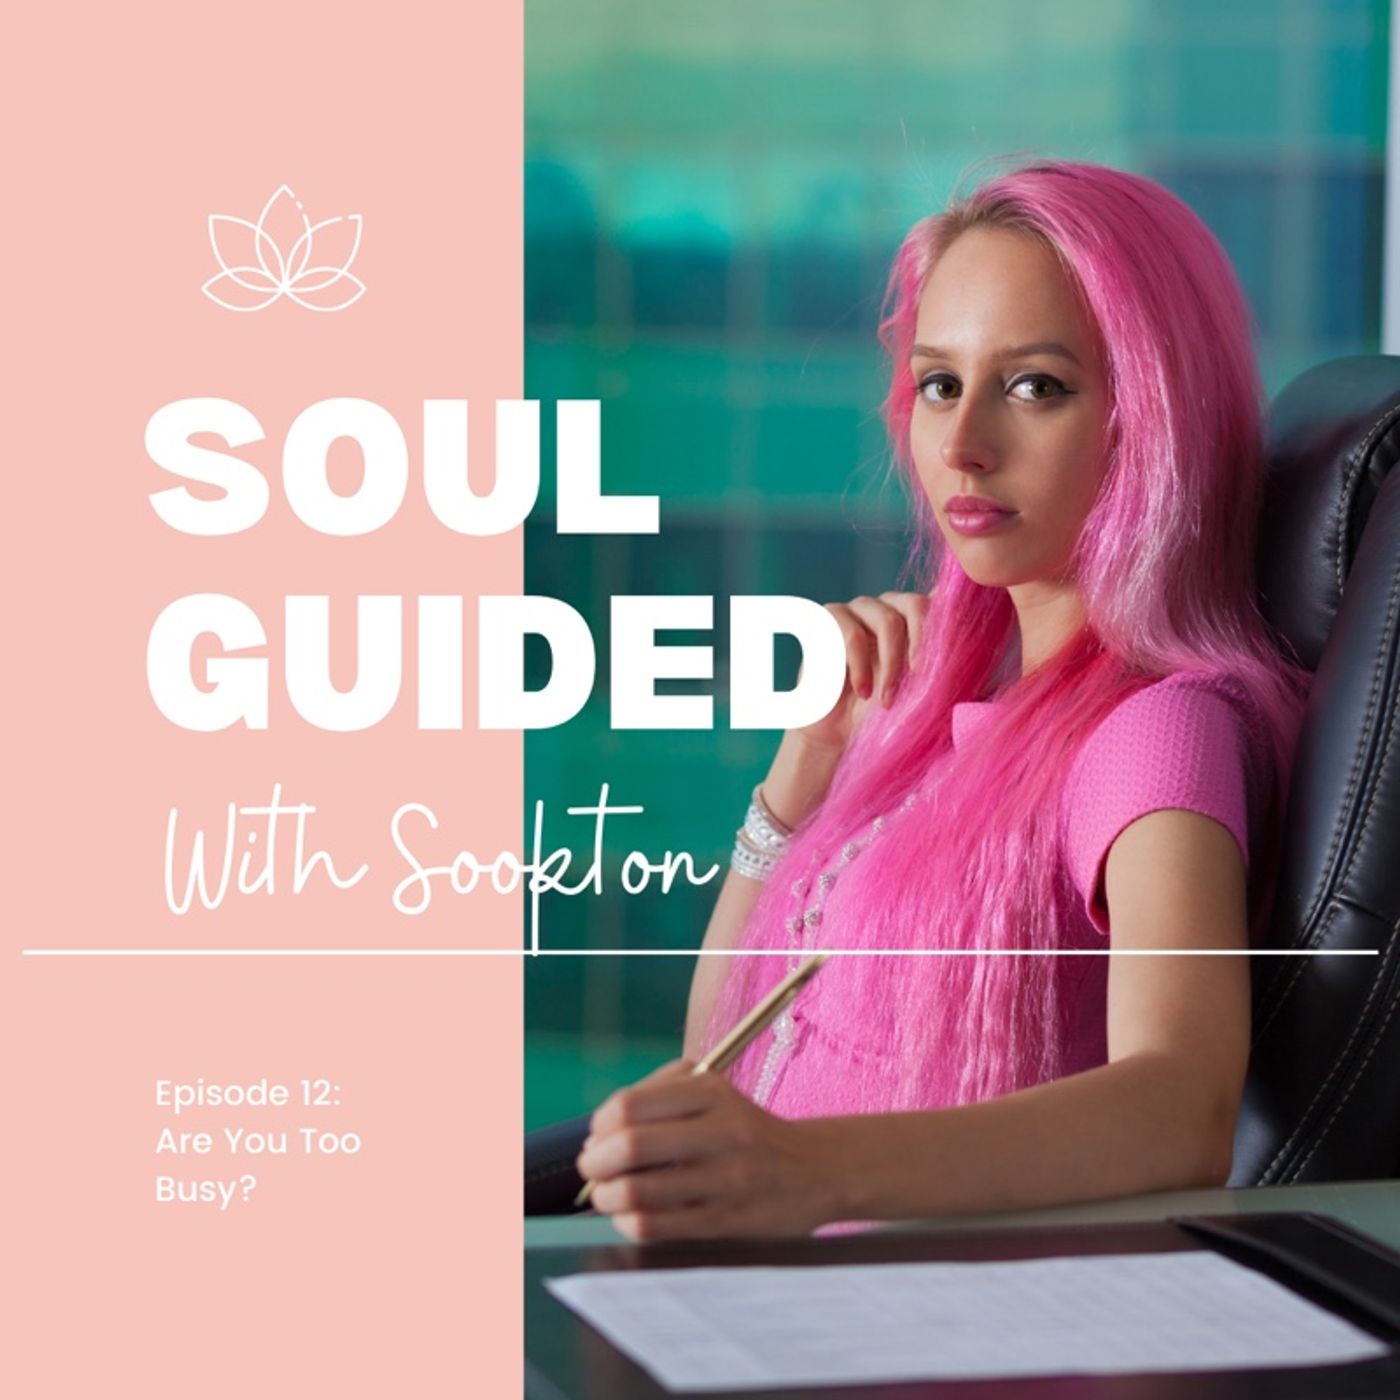 Soul Guided With Sookton: Are You Too Busy?